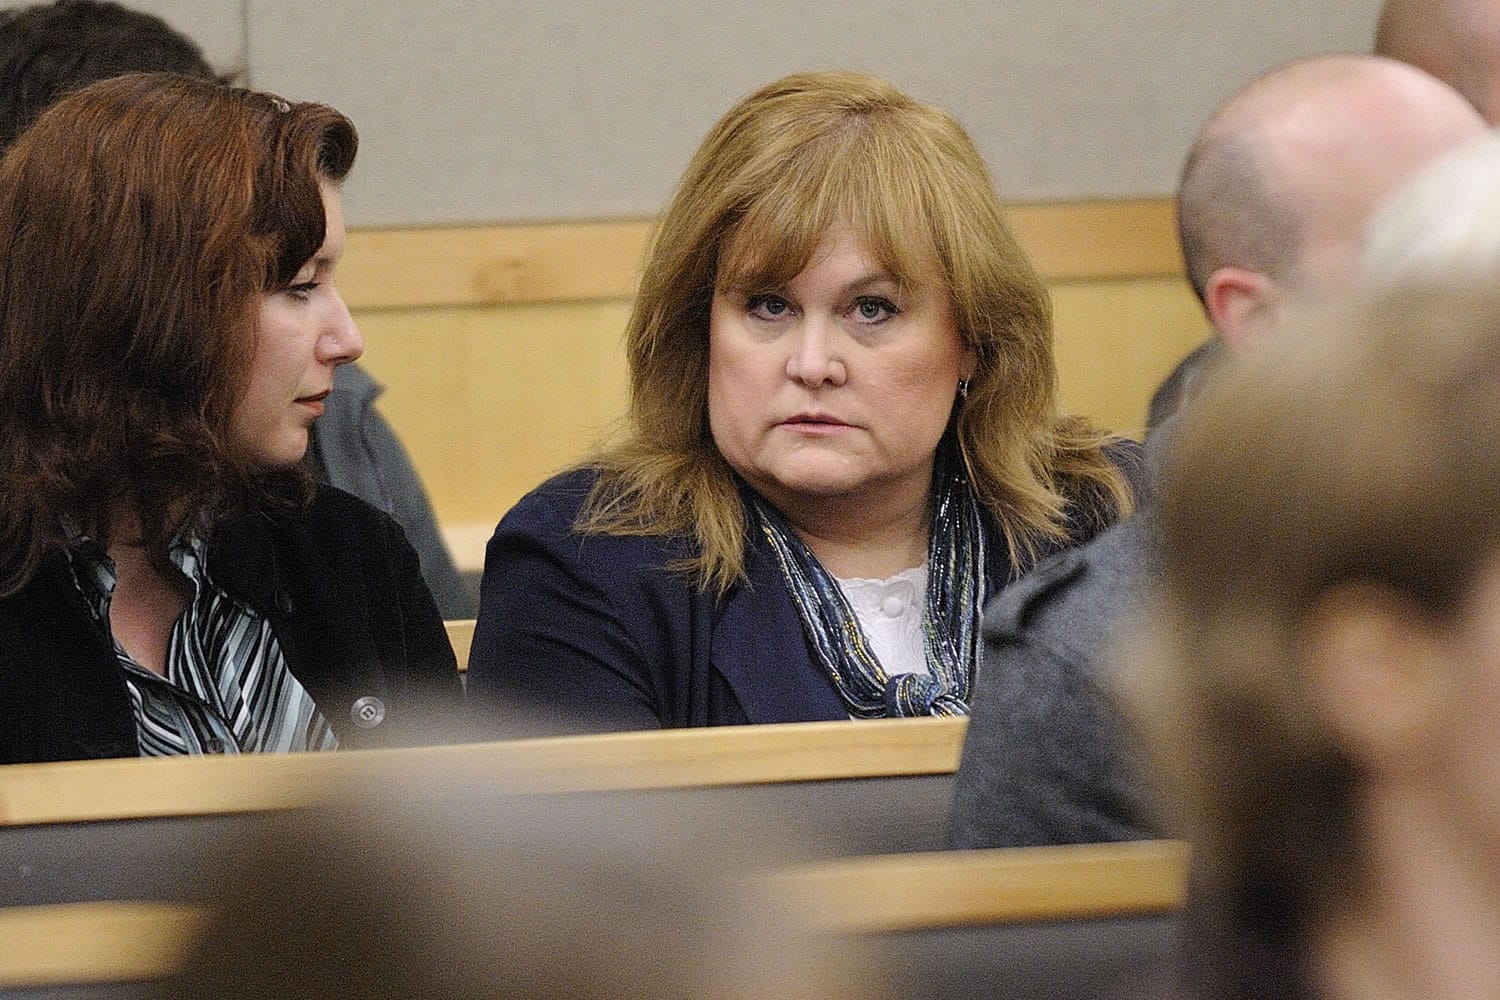 Sandra Weller, accused of locking up and starving her adopted twins, was arraigned Thursday.